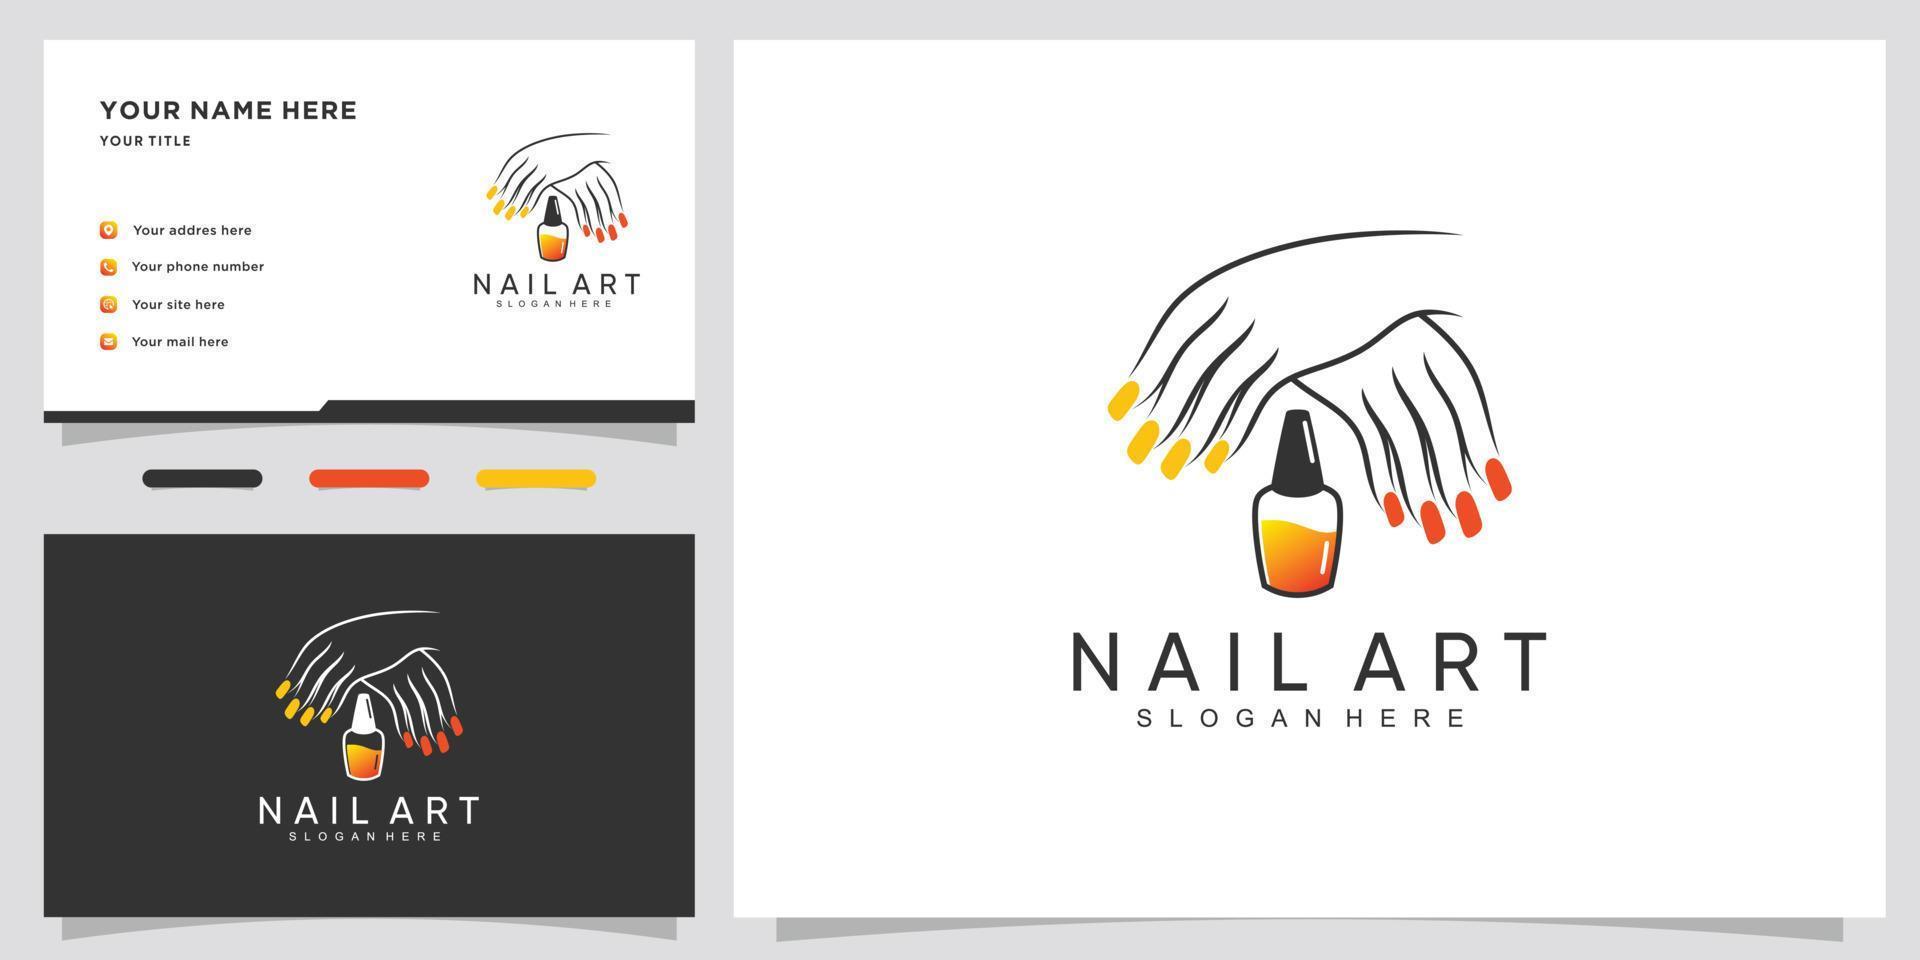 Nail Artist Business Card Template - Download in Word, Google Docs,  Illustrator, PSD, Apple Pages, Publisher | Template.net